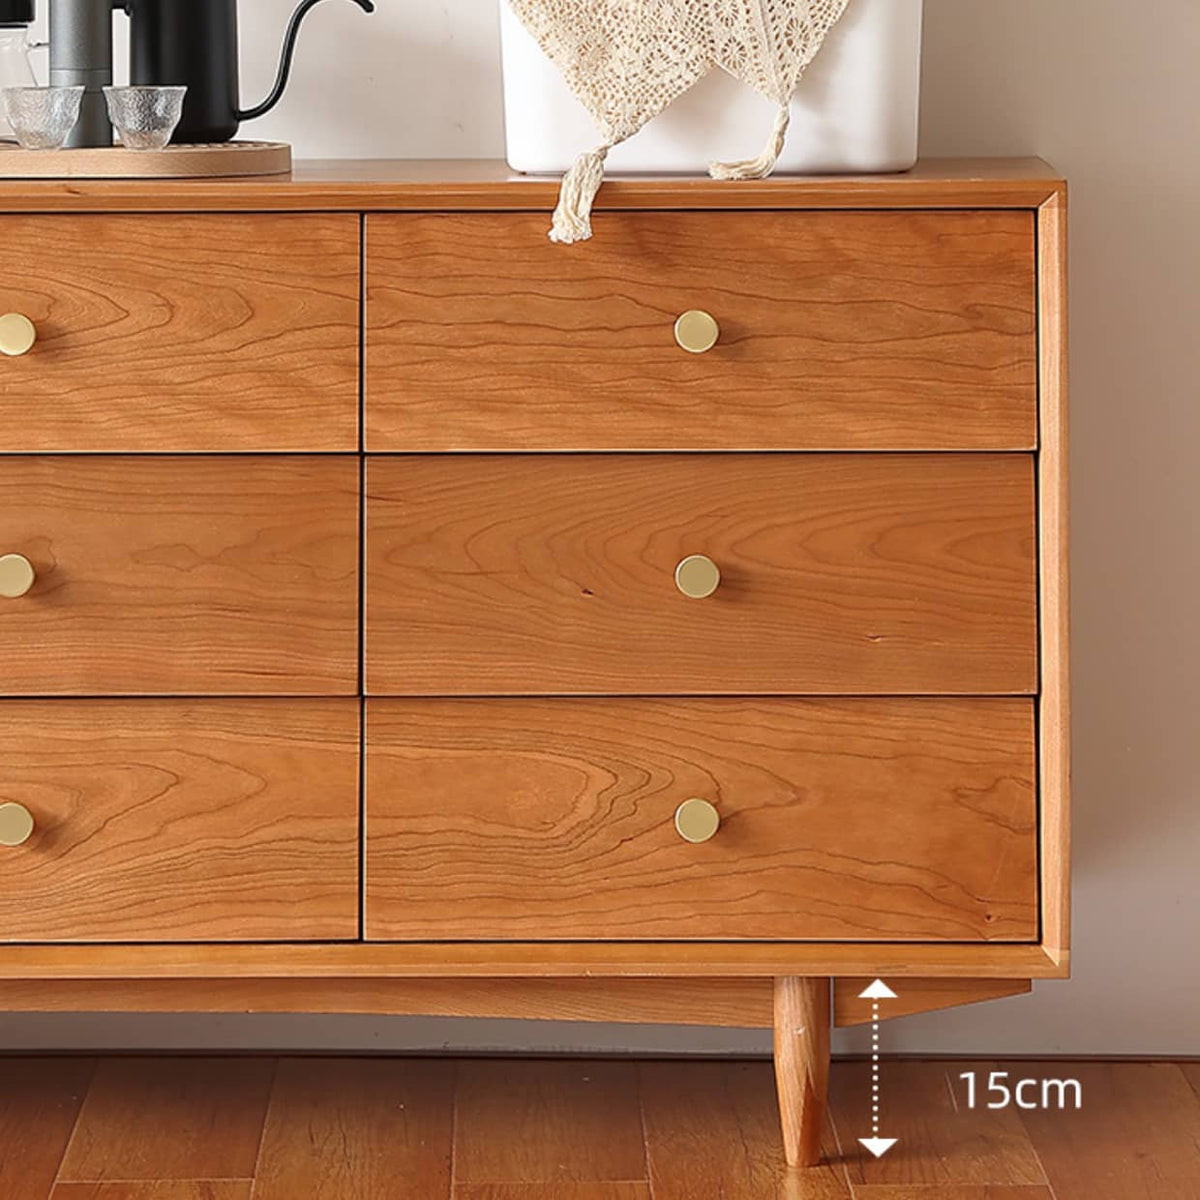 Premium Handcrafted Natural Cherry and Beech Wood Cabinet - Elegant and Durable Storage Solution Hersa-1636